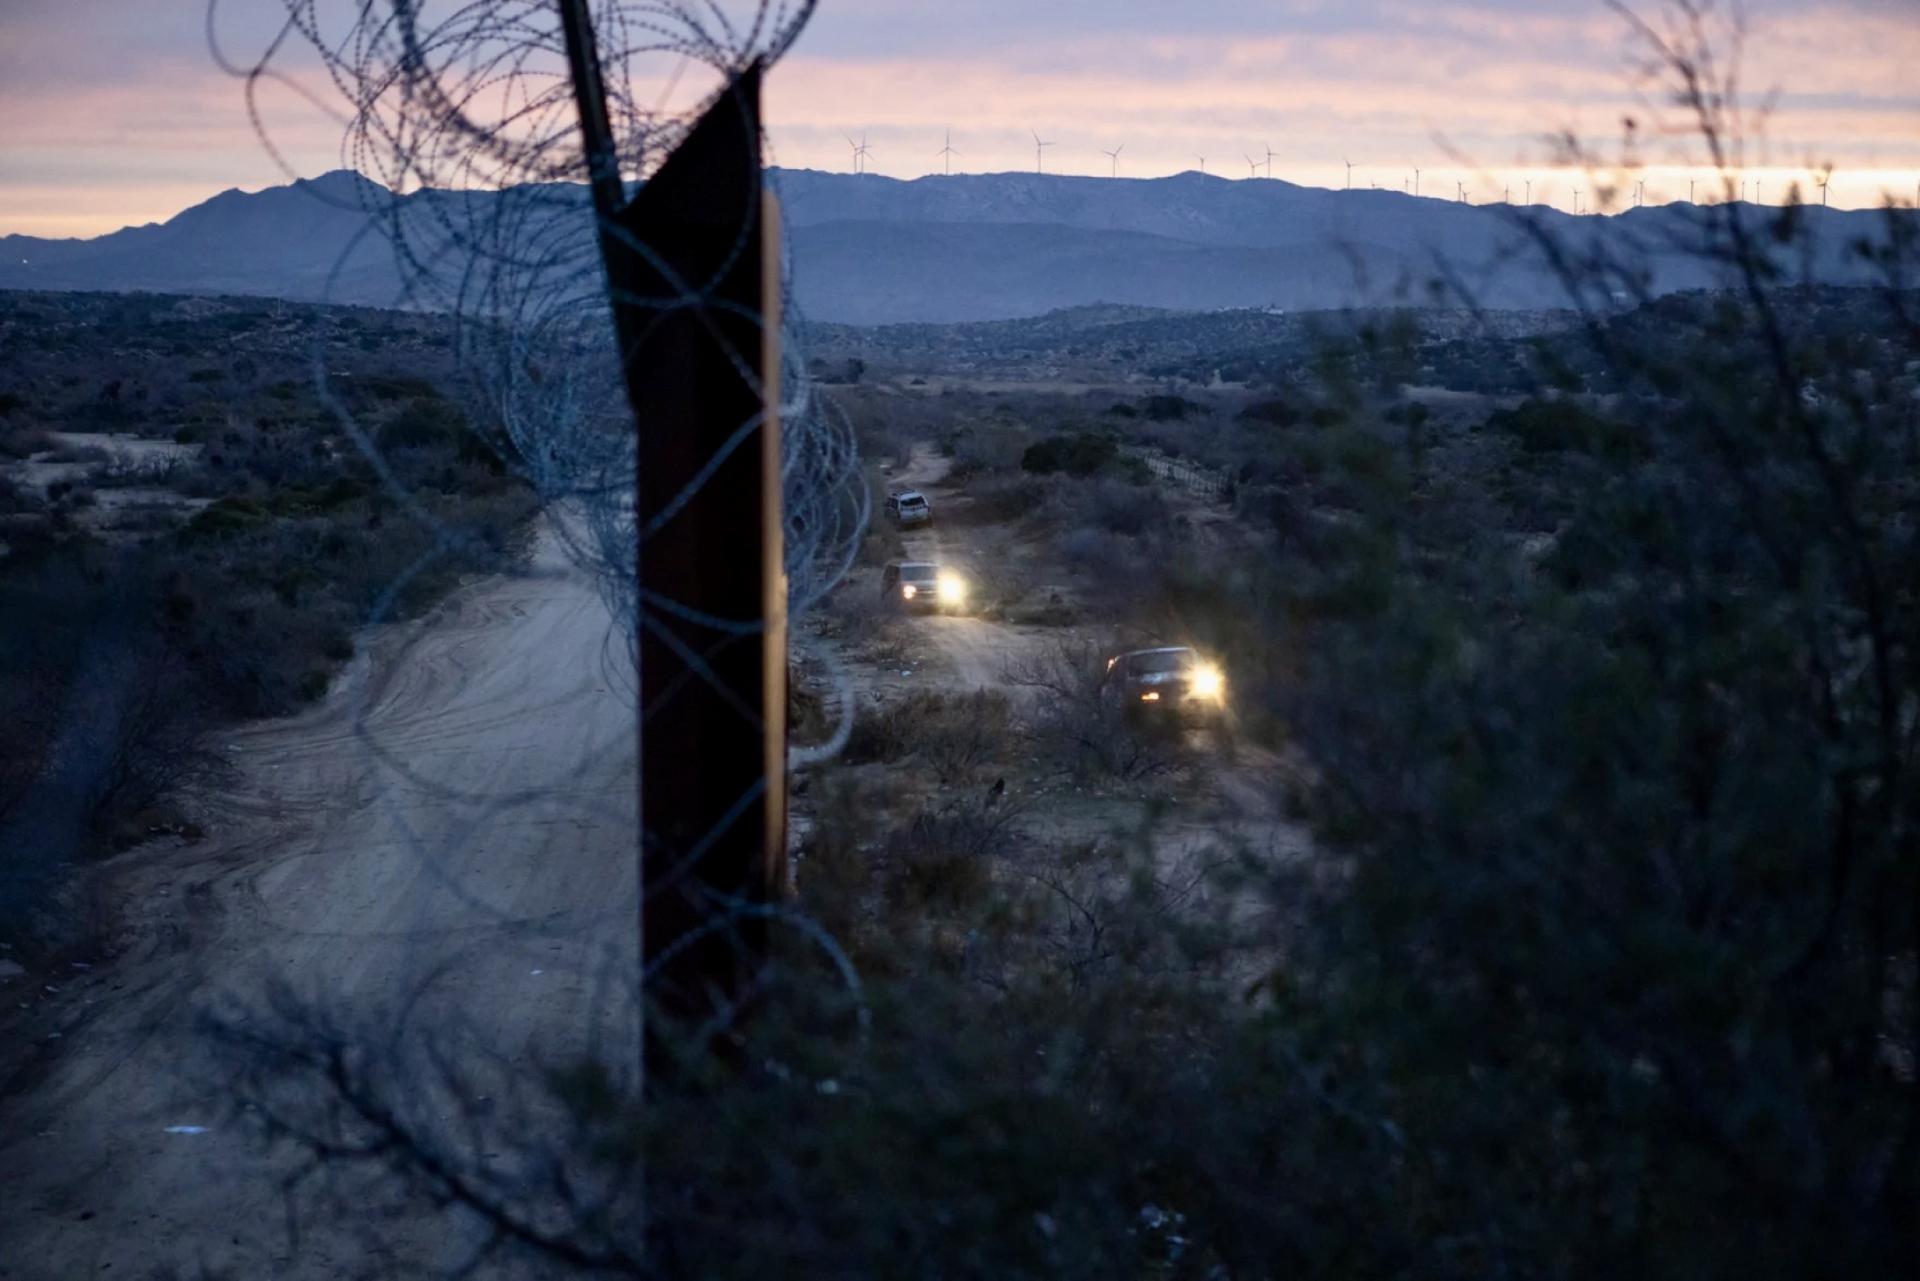 Two trucks filled with migrants approach a gap in the border wall at dawn.